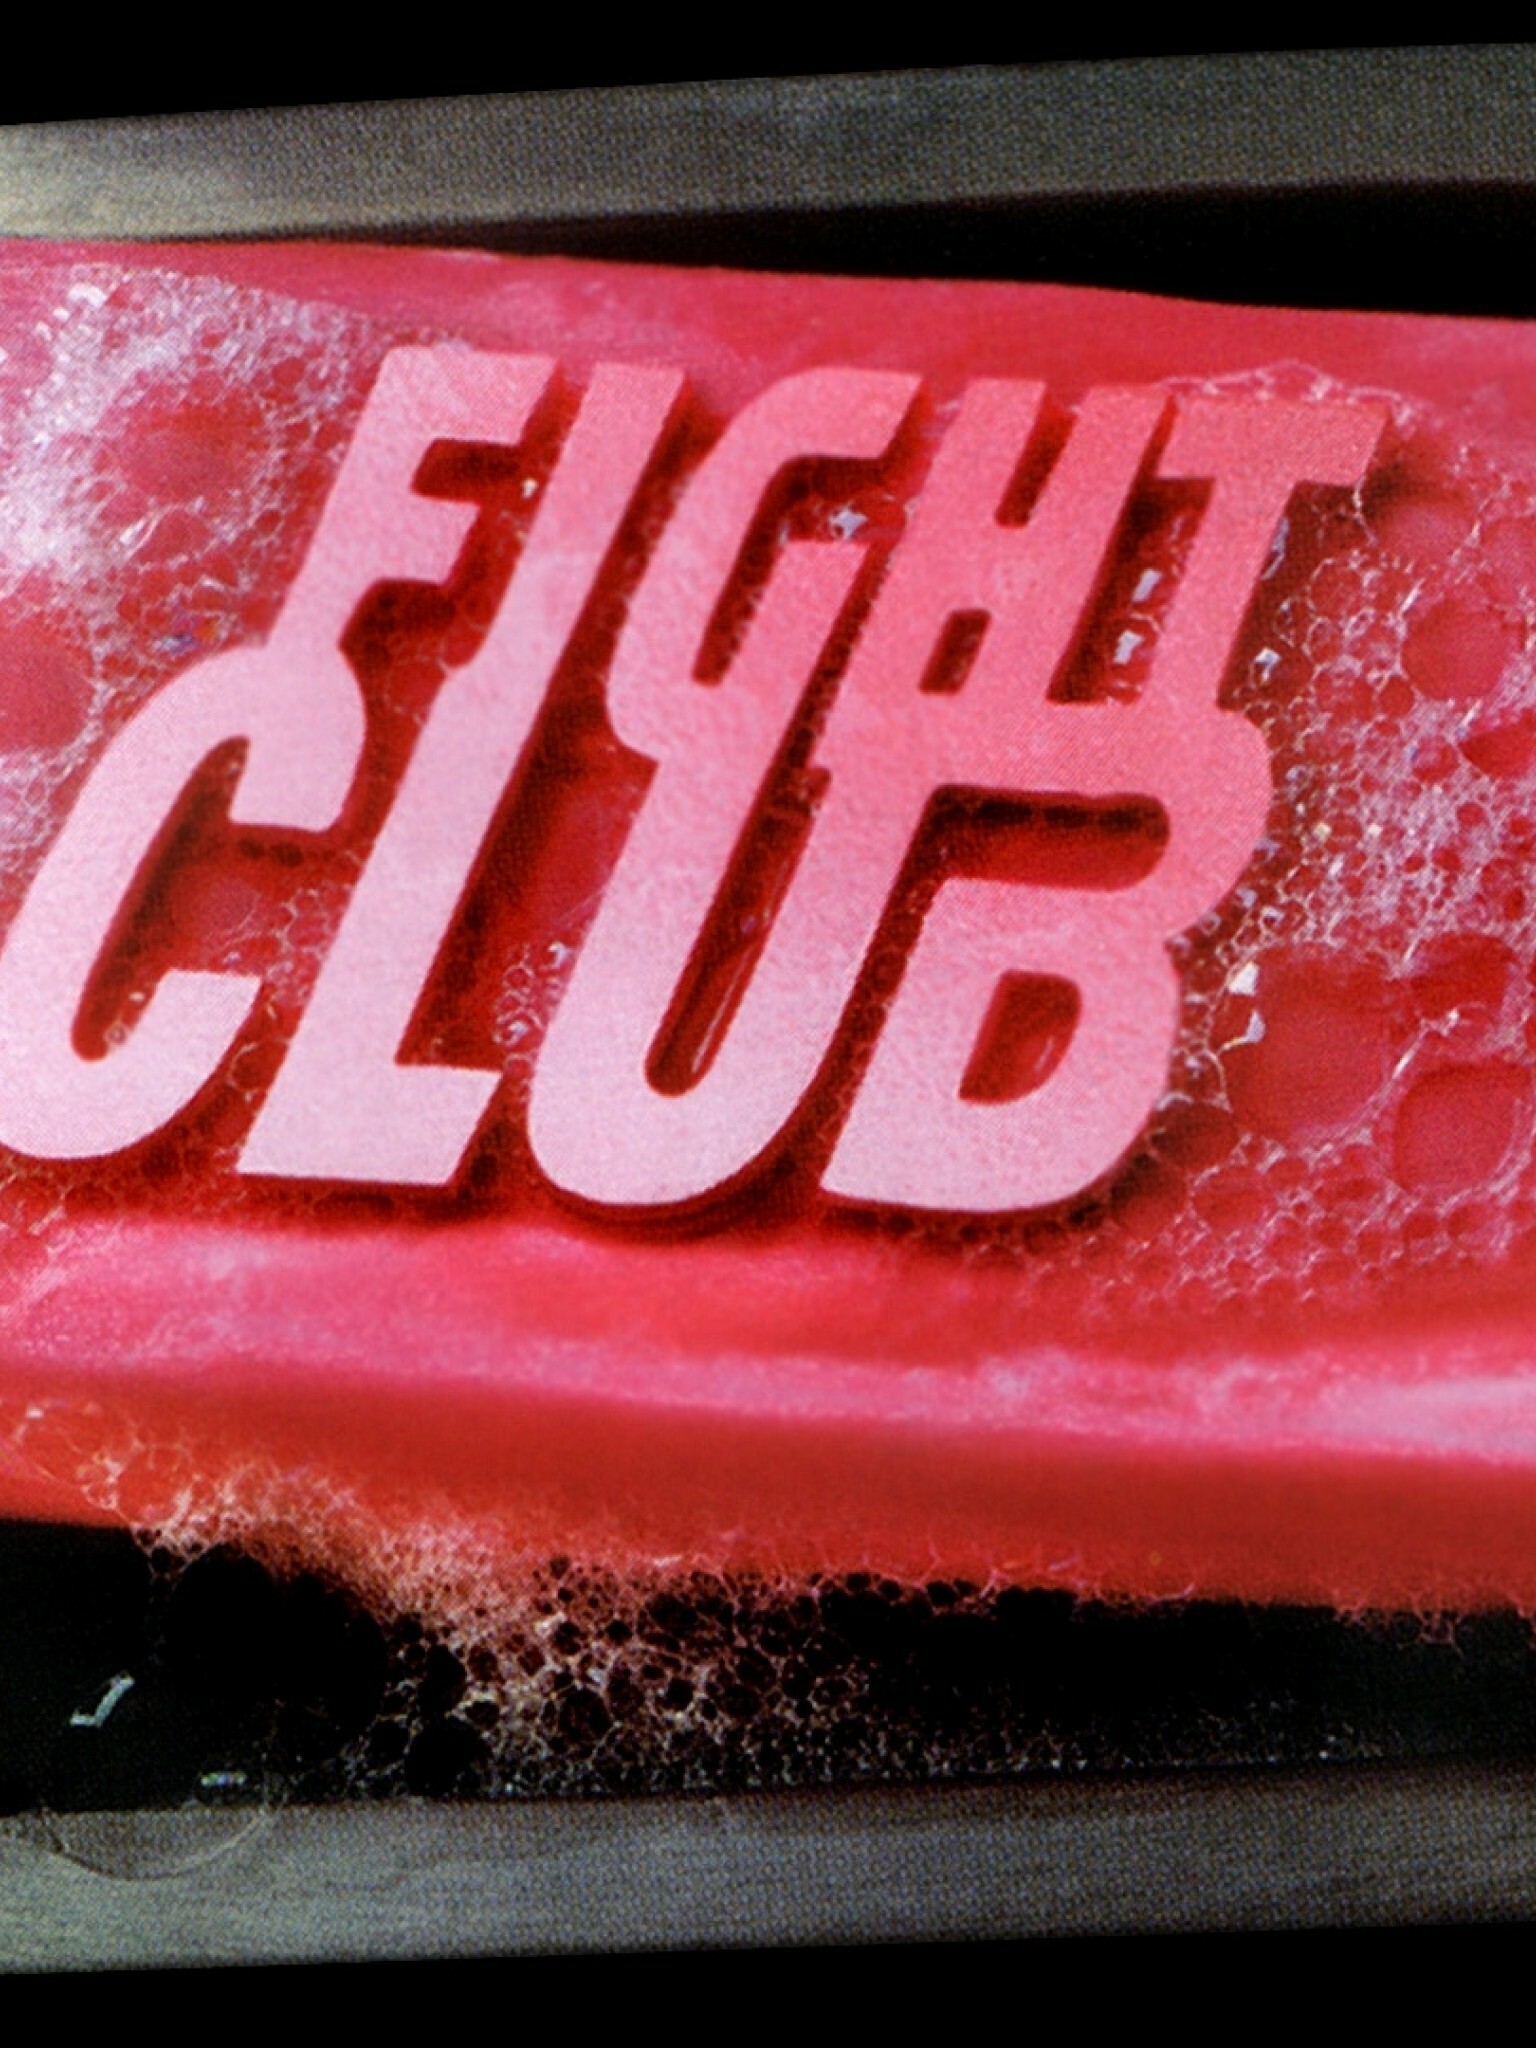 Fight Club: Palahniuk's novel was optioned by Fox 2000 Pictures producer Laura Ziskin. 1540x2050 HD Wallpaper.